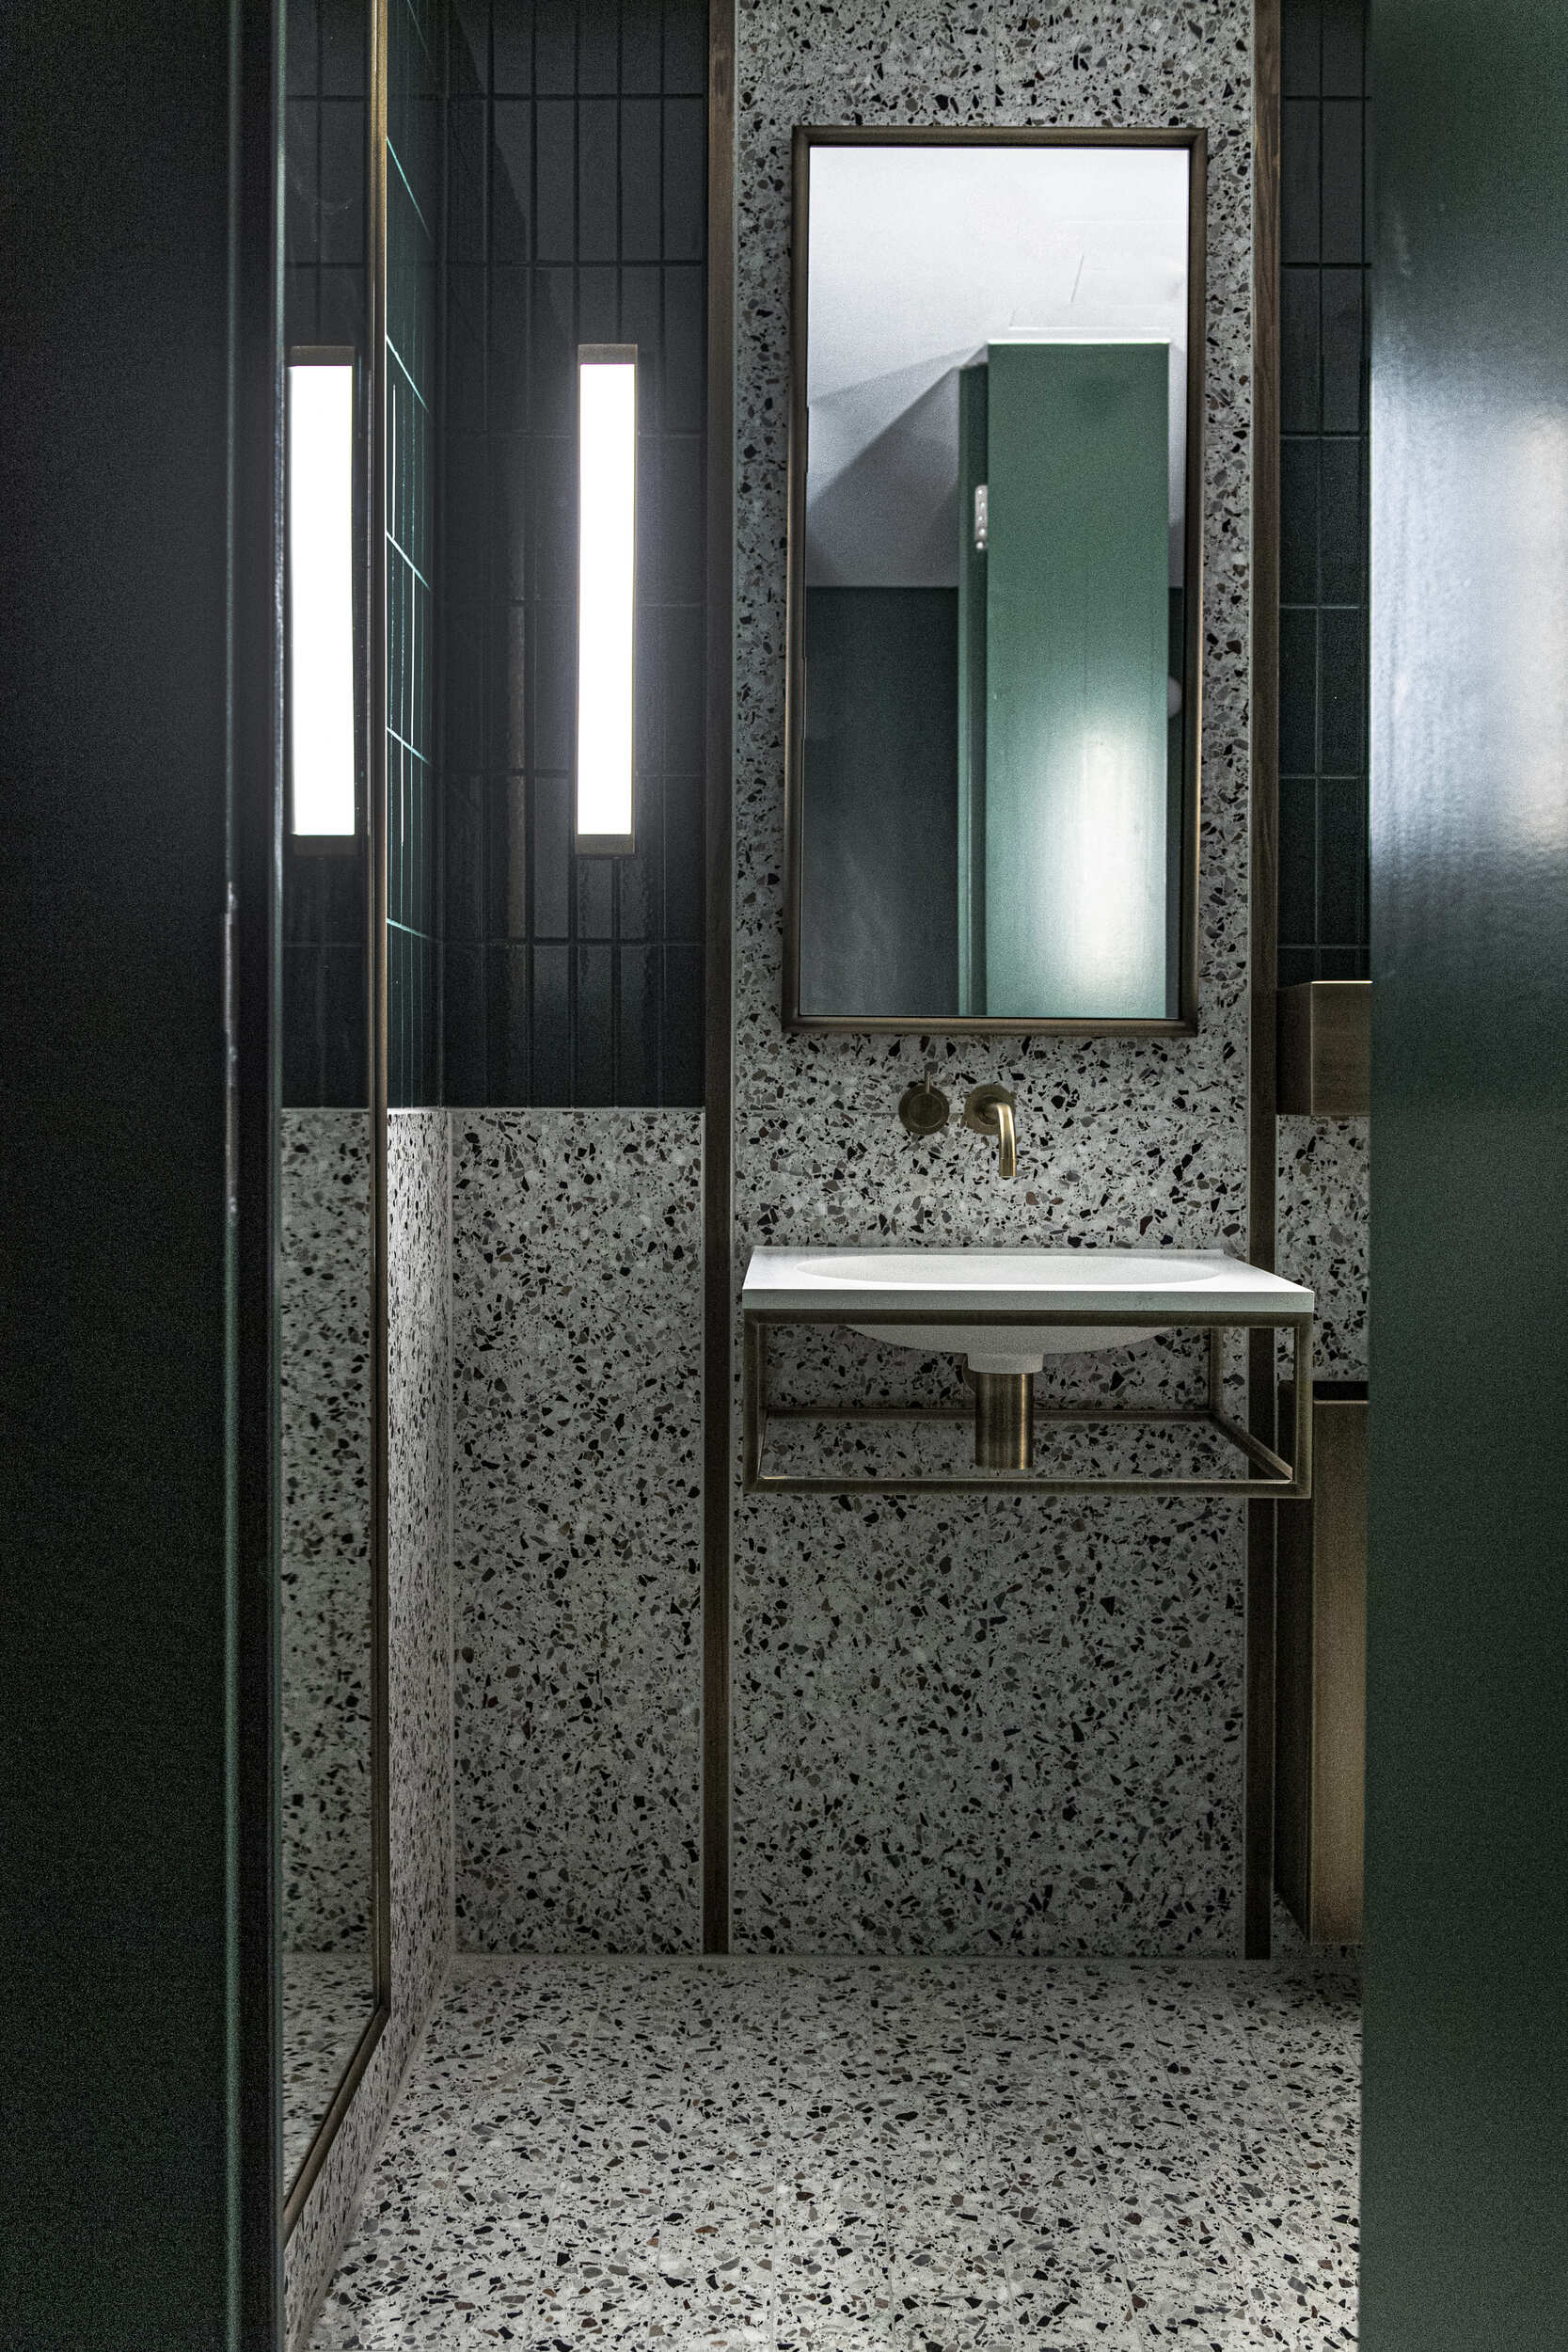 Toilet basin with terrazzo tiles and modern wall mounted mirrors